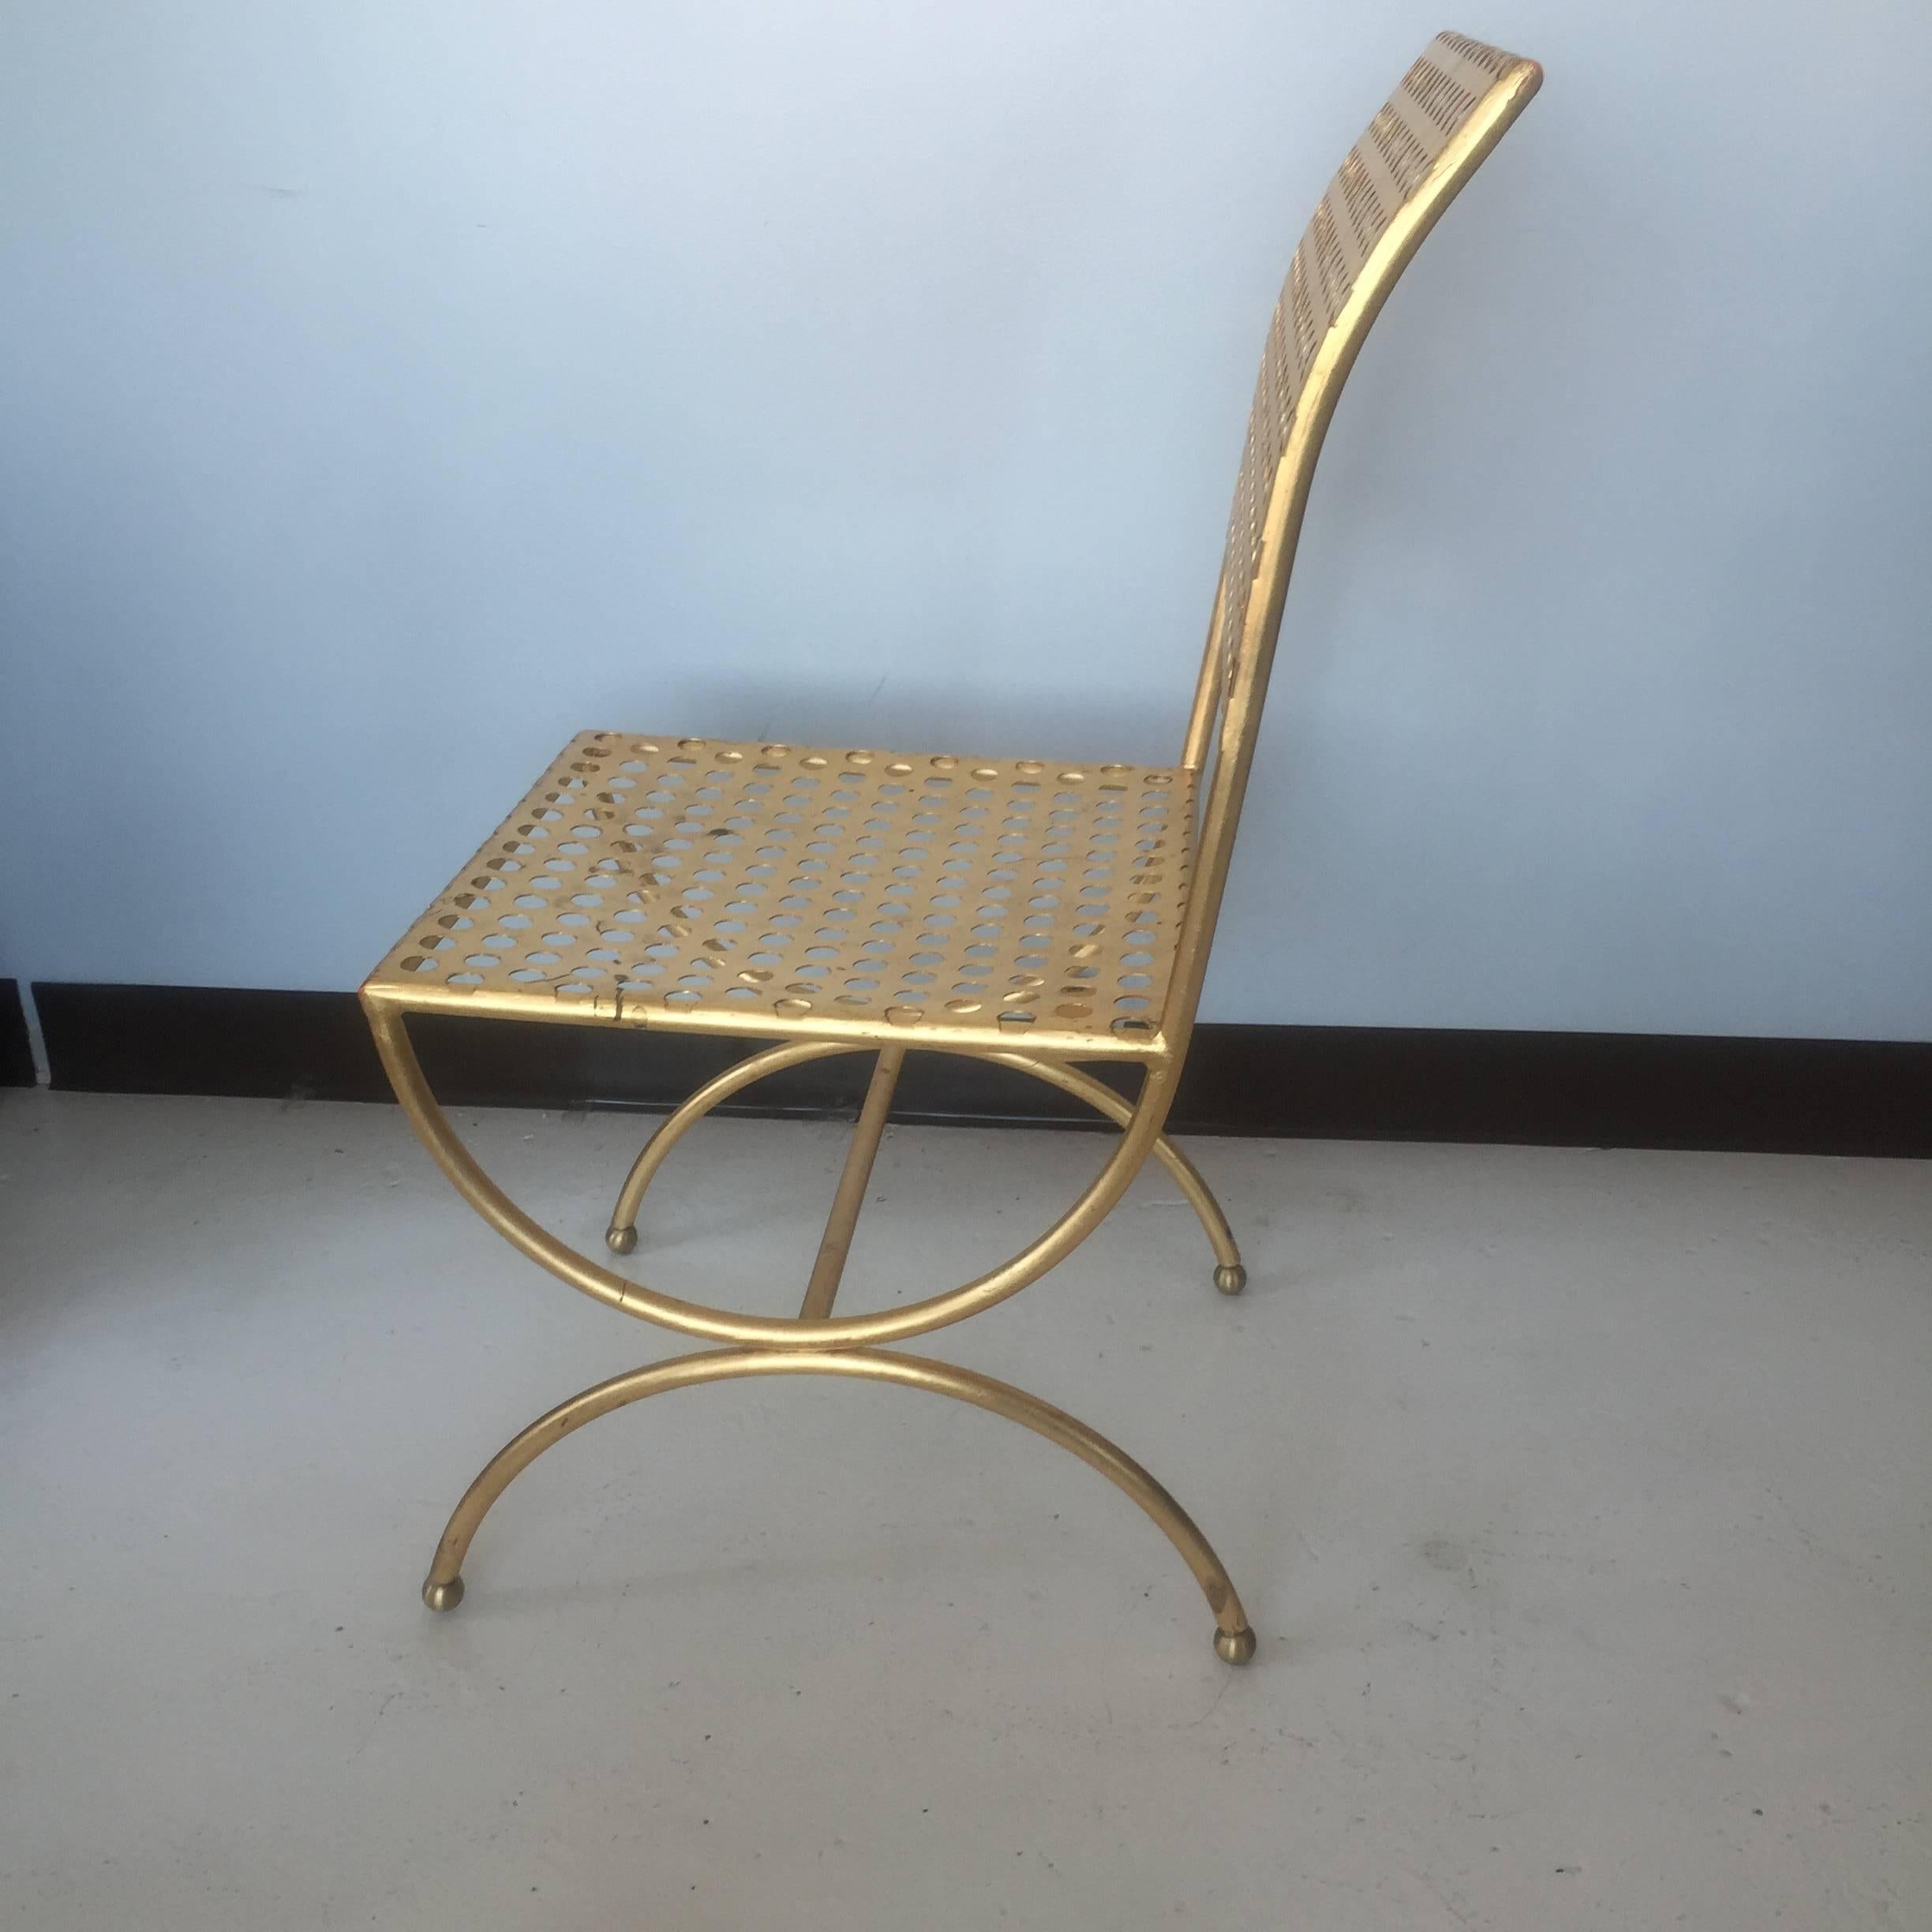 Perforated gilt iron chair designed by Tony Duquette in the 1960s, produced for Baker circa 2011.